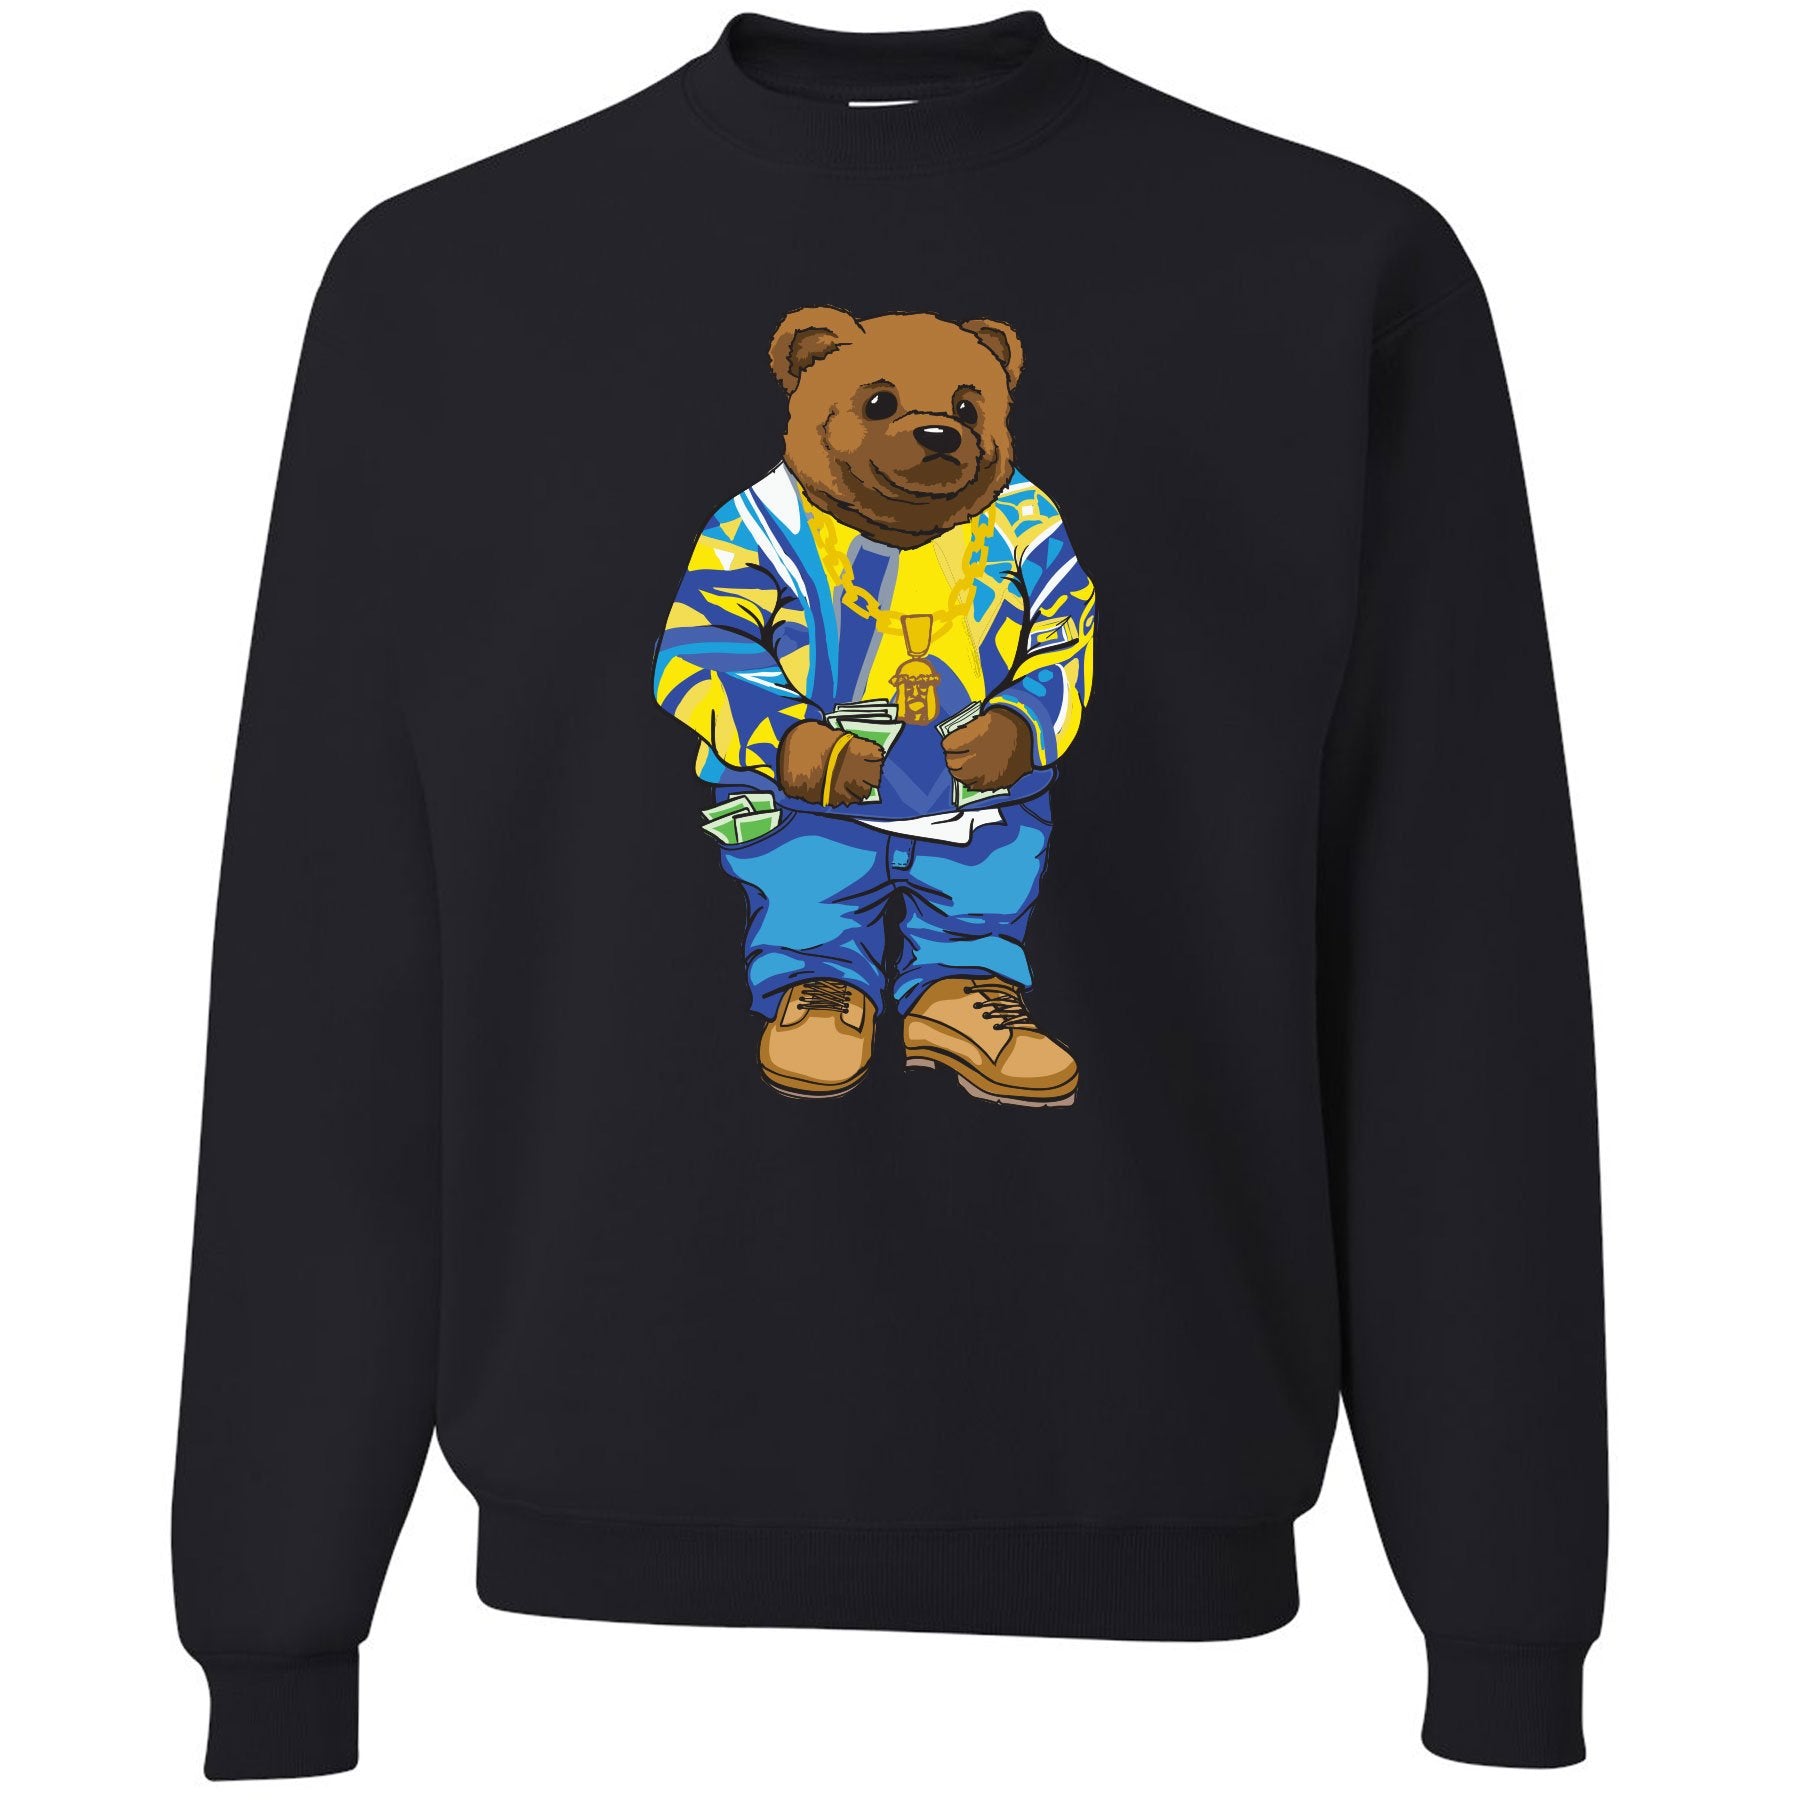 Printed on the front of the Air Jordan 5 Alternate Laney sneaker matching black crewneck is the Sweater Bear wearing a coogi sweater that matches the Air Jordan 5 Laney sneakers